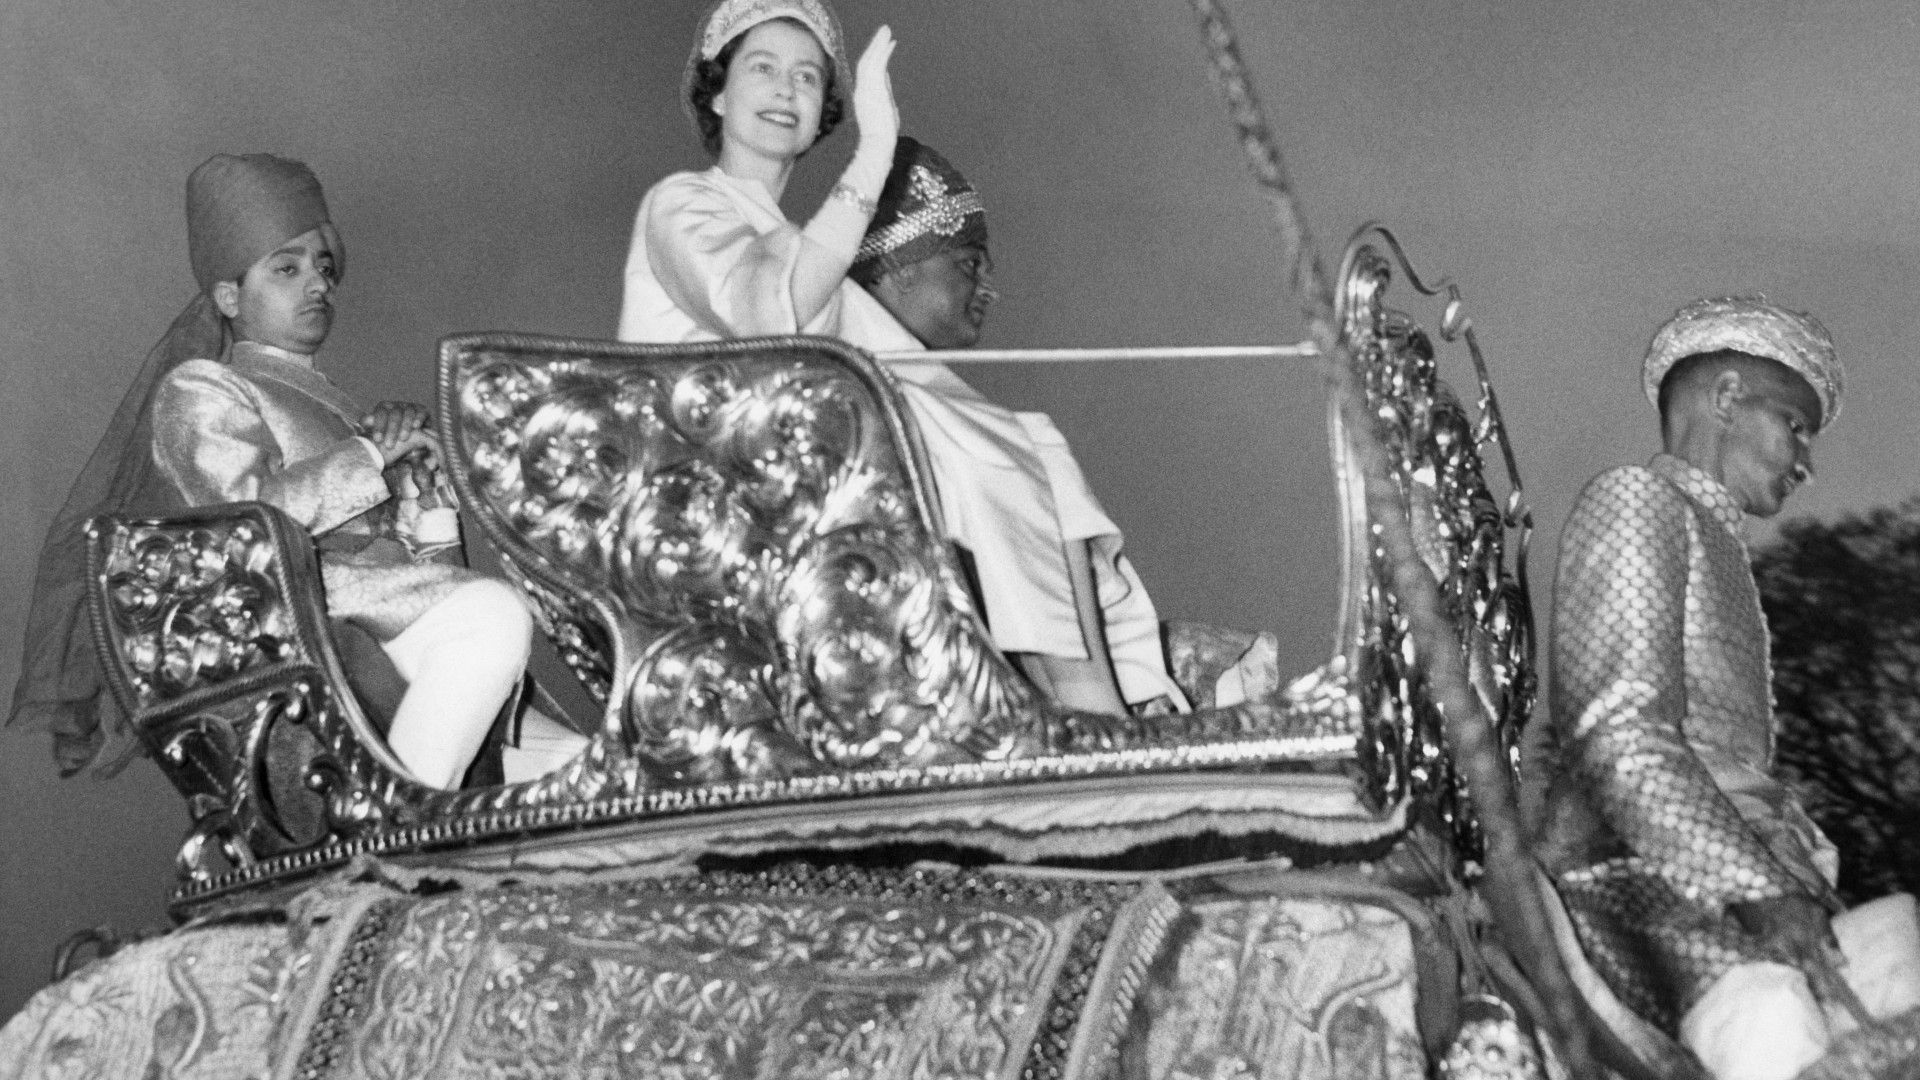 <p>                     During her 1961 trip to India following the breakdown of the British Empire, Queen Elizabeth II showed off her adventurous streak, opting to ride on top of an elephant in Jaipur.                   </p>                                      <p>                     She rode the elegantly decorated elephant within the courtyard of the royal palace, alongside Sir Man Singh, the Maharajah (Prince) of Jaipur at the time. To ensure she was dressed appropriately, the Queen is seen in the picture were a regal gold outfit. What a picture!                   </p>